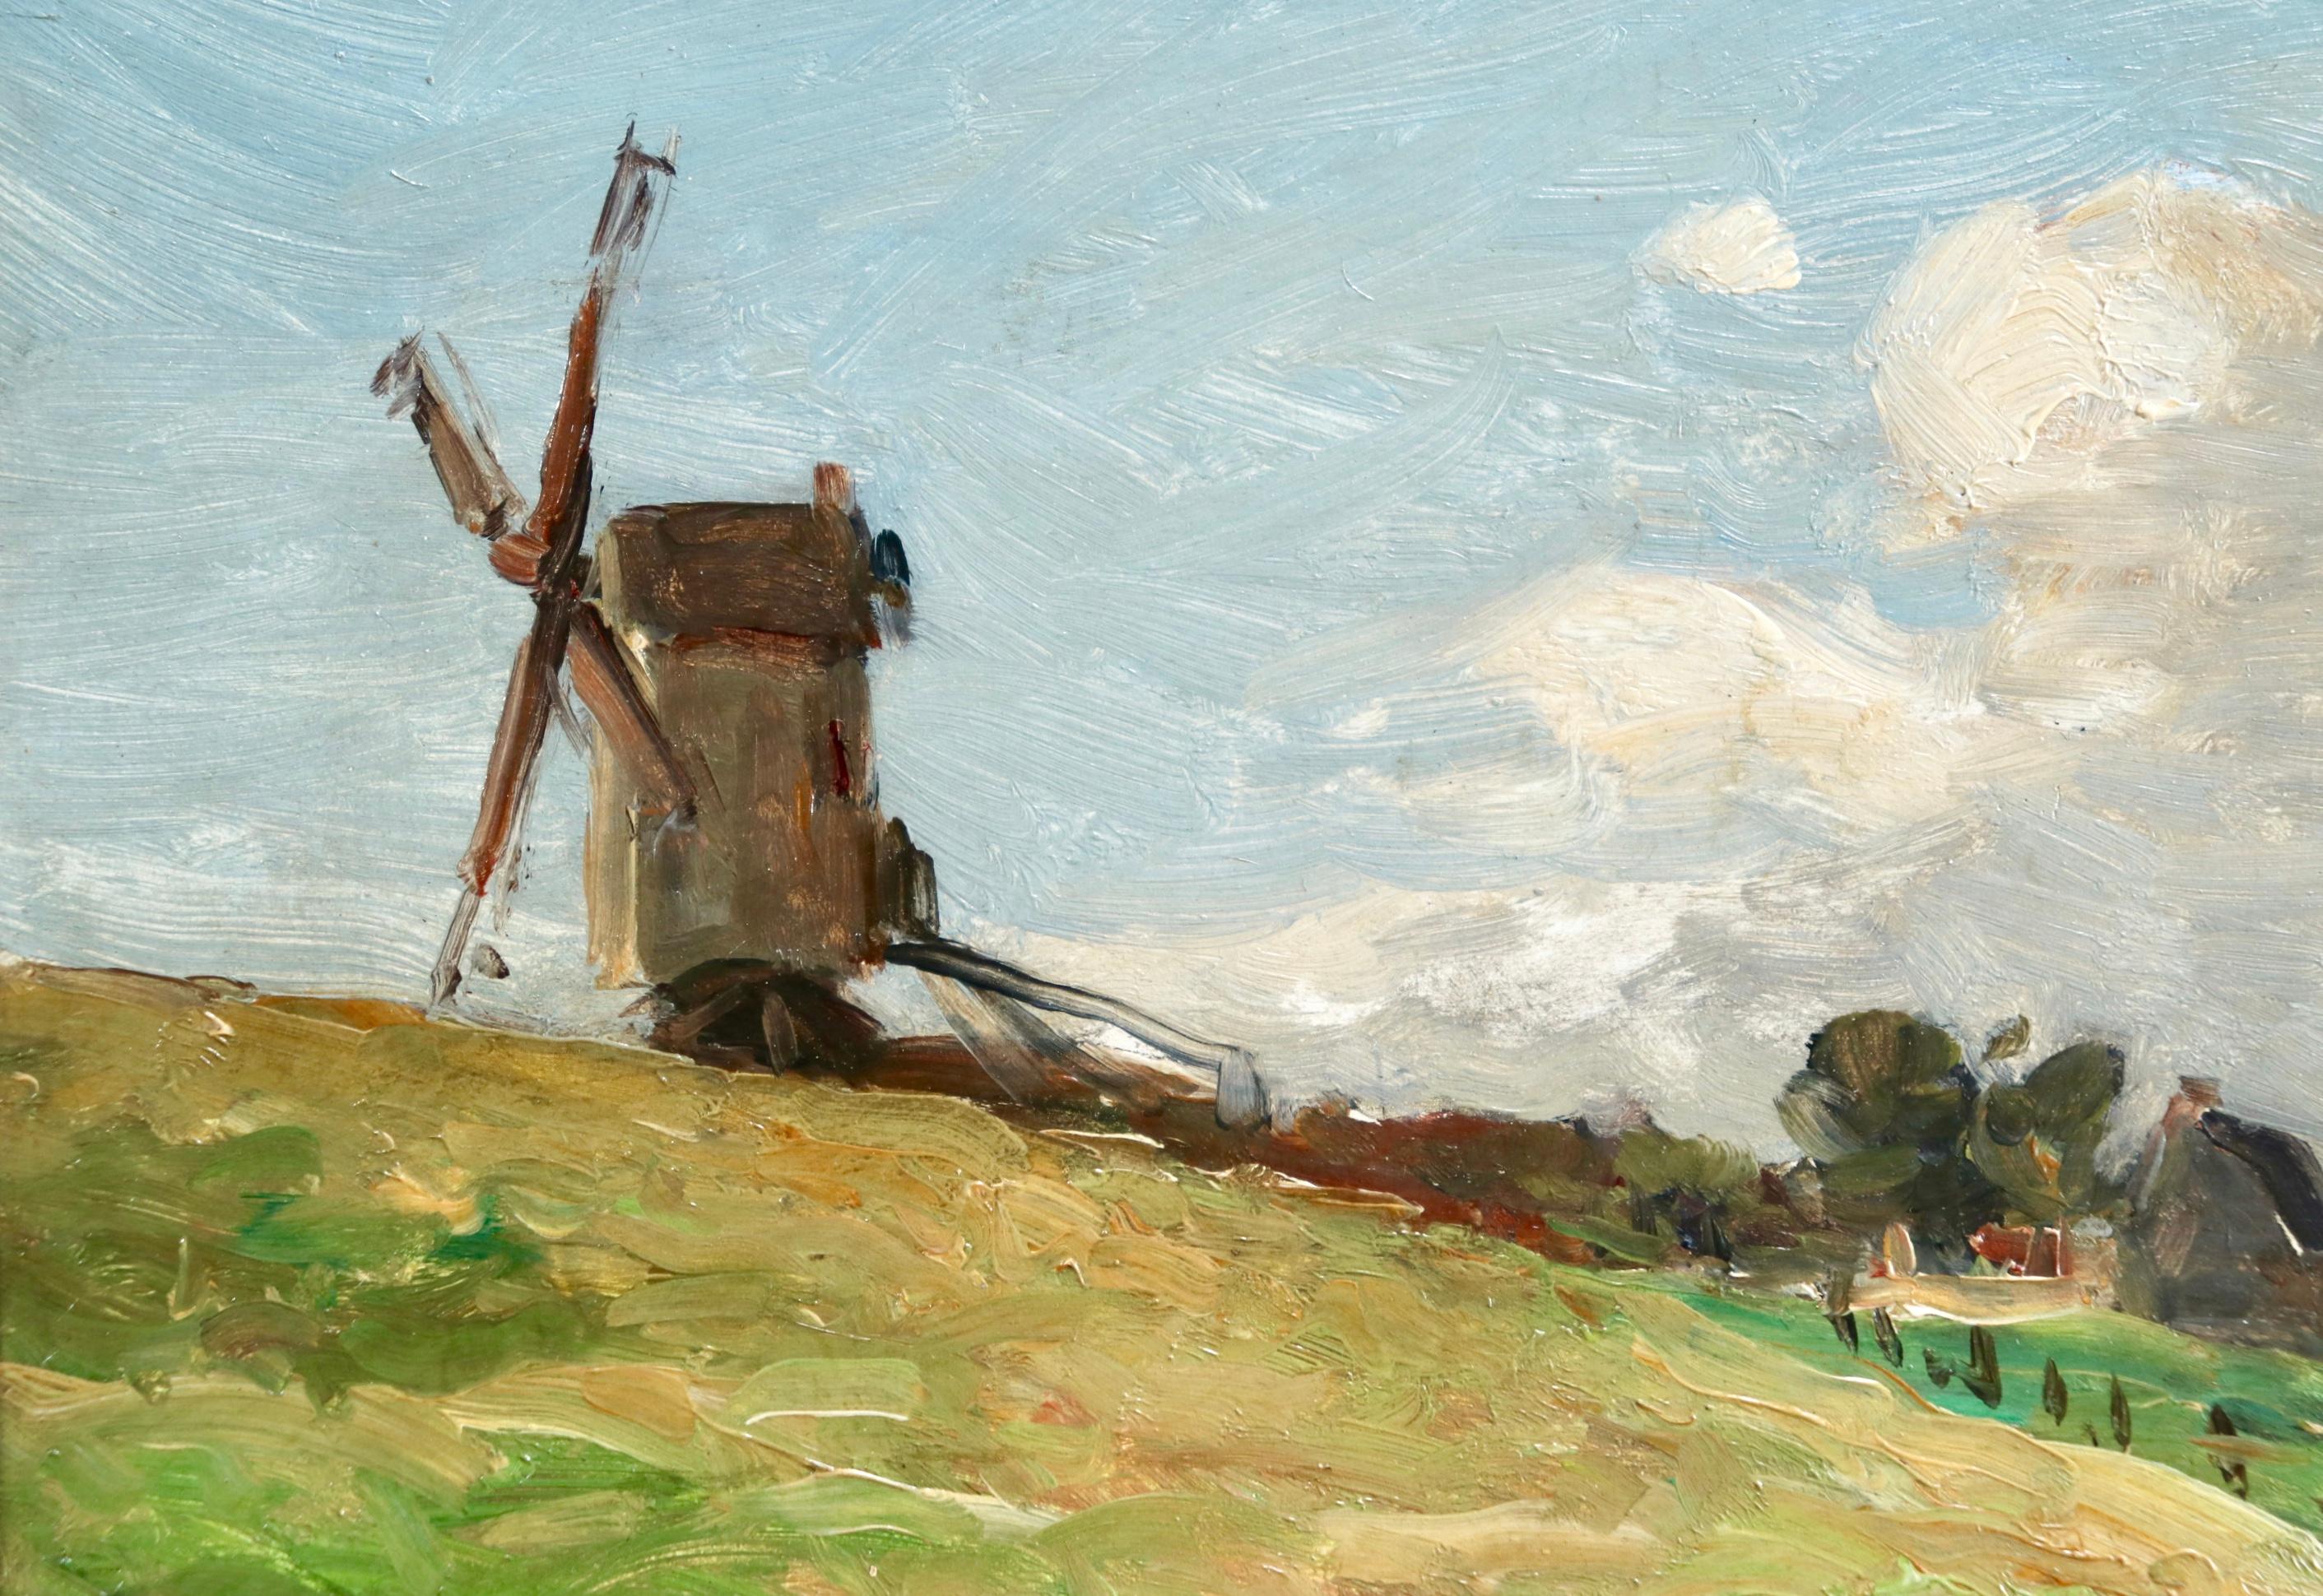 In the Fields - 19th Century Oil, Figure & Windmill in Landscape by Guillemet - Impressionist Painting by Jean-Baptiste-Antoine Guillemet